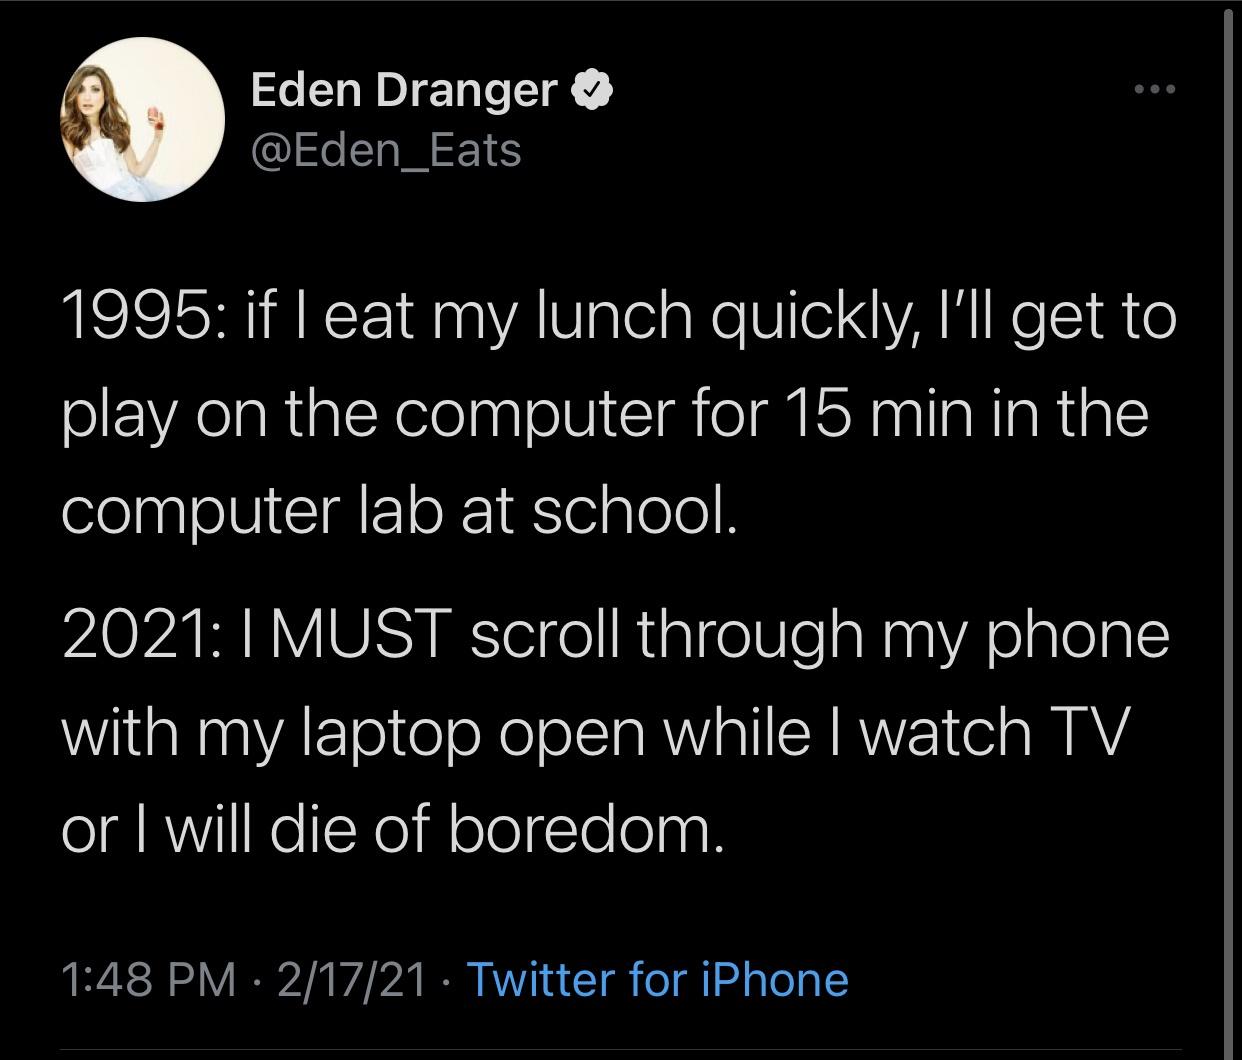 screenshot - Eden Dranger 1995 if I eat my lunch quickly, I'll get to play on the computer for 15 min in the computer lab at school. 2021 I Must scroll through my phone with my laptop open while I watch Tv or I will die of boredom. 21721 Twitter for iPhon